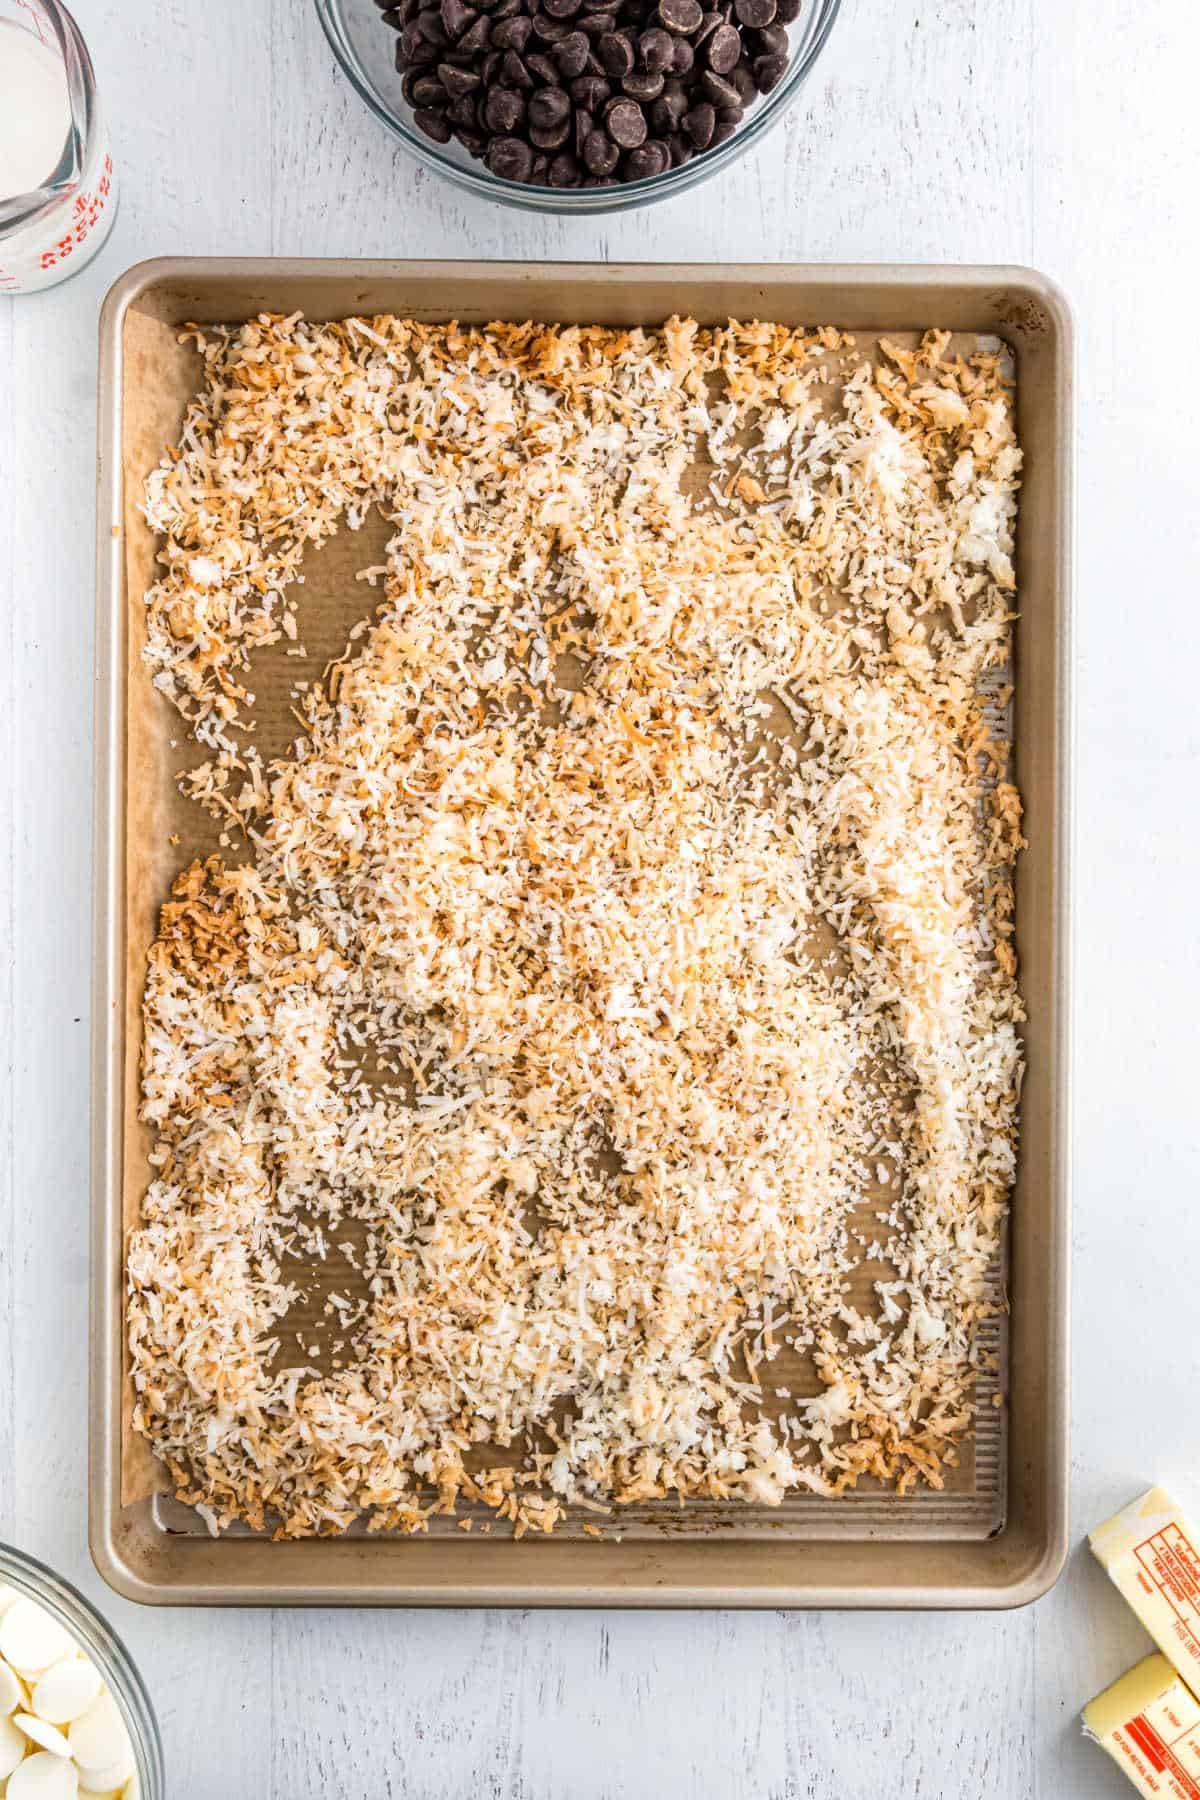 Sheet pan with toasted coconut.